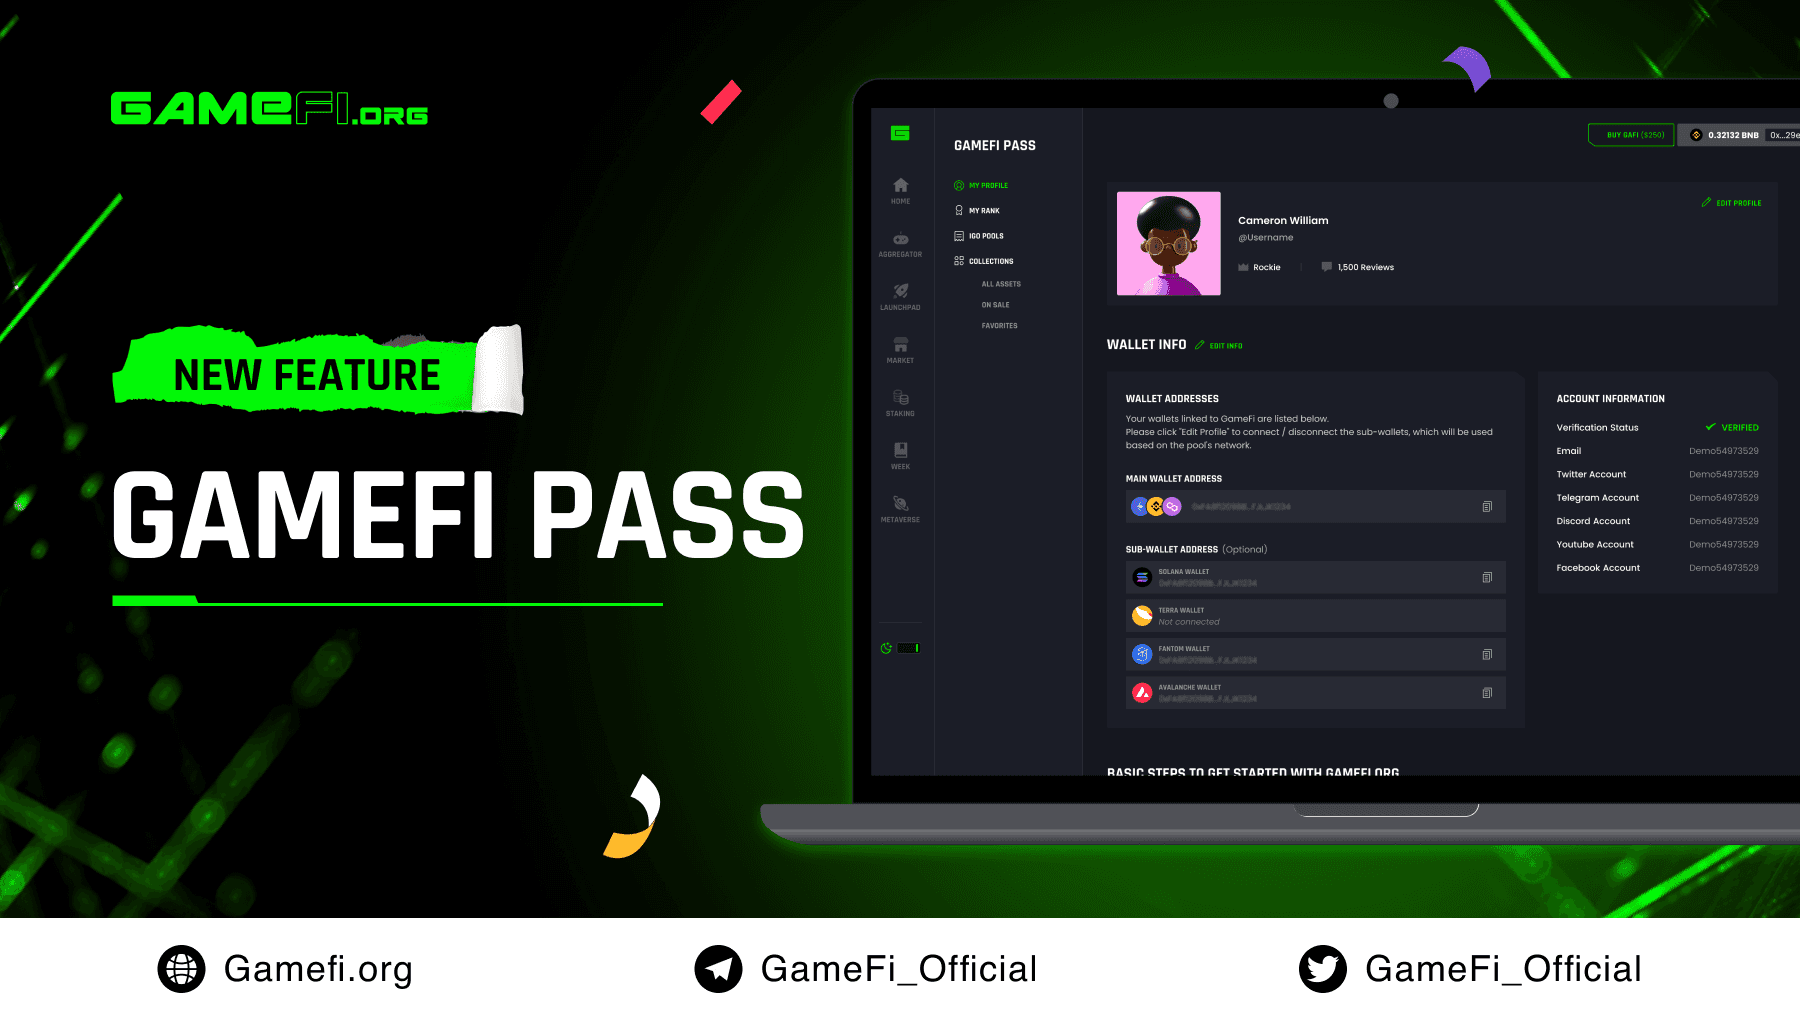 GameFi Pass: An All-in-One Identity to Mark Your GameFi.org Footprints